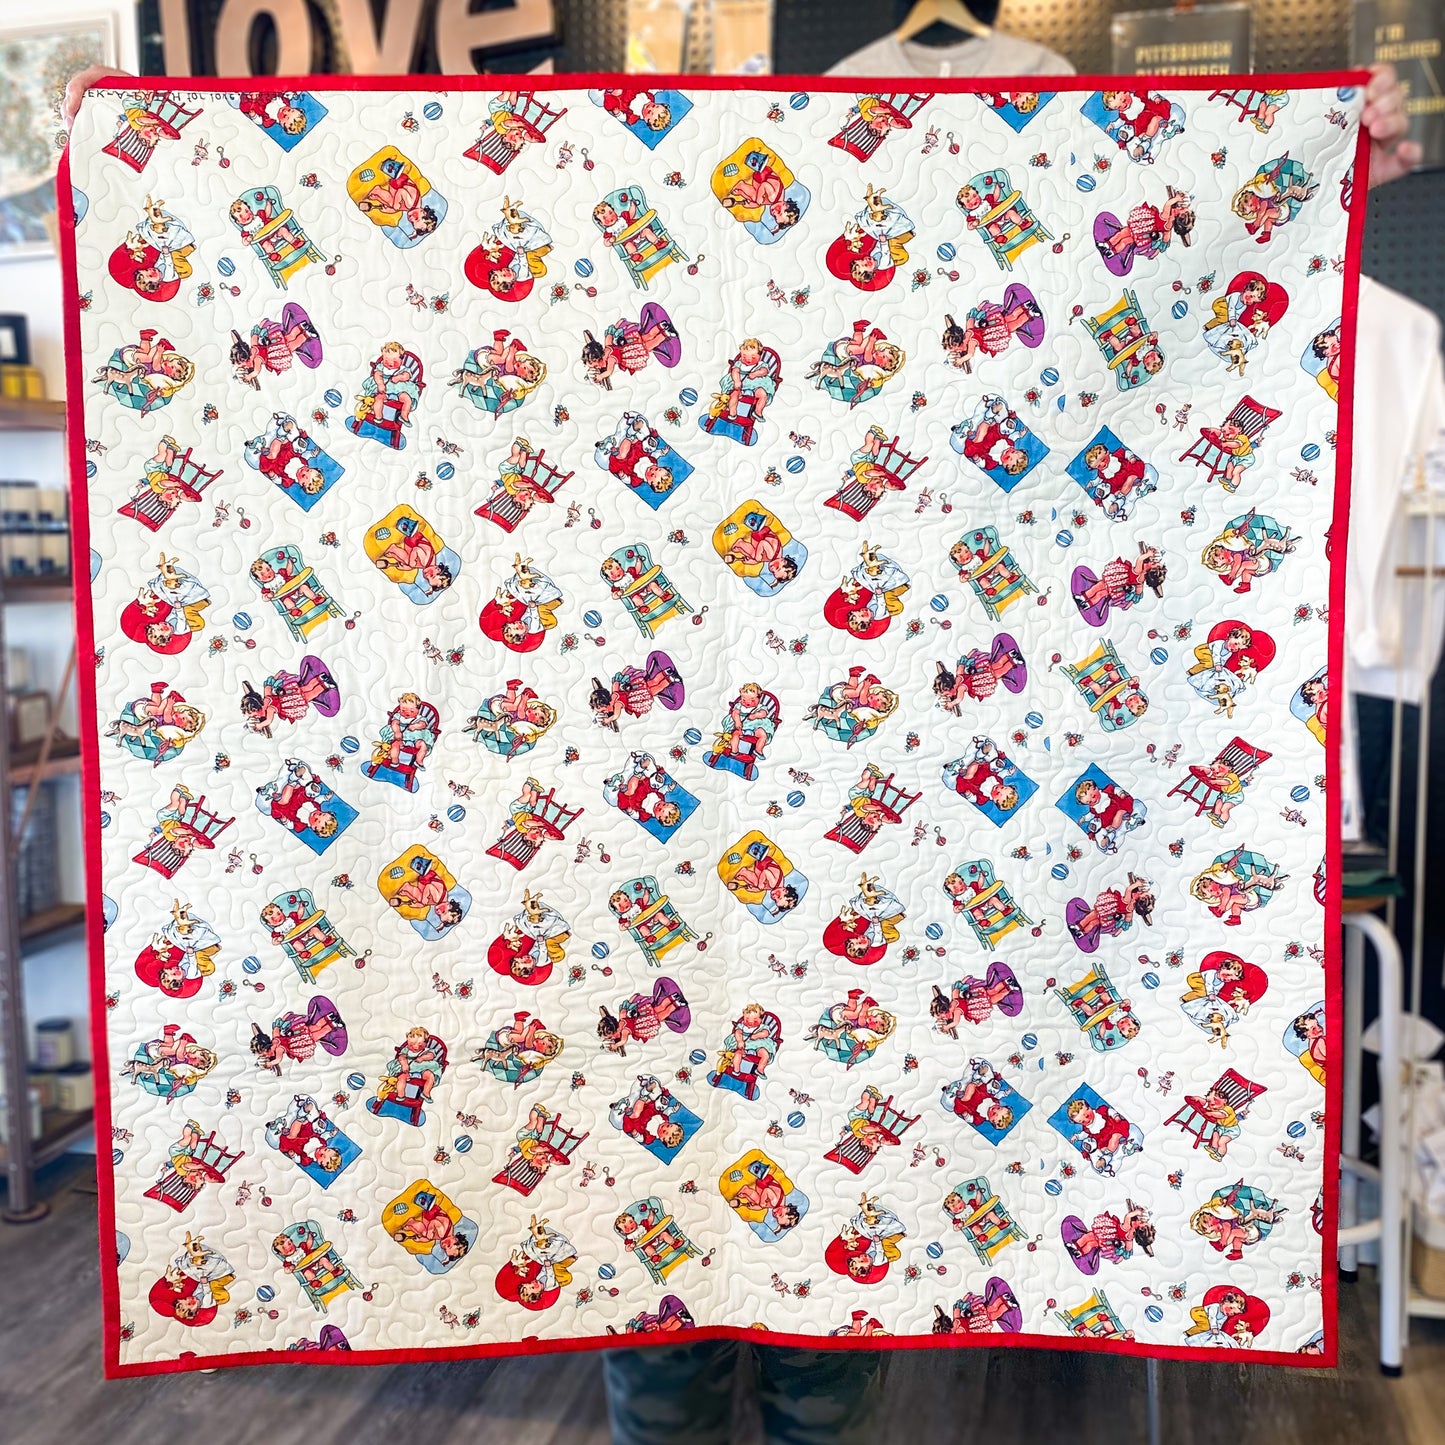 Peek-a-Patch Learning Quilt 1